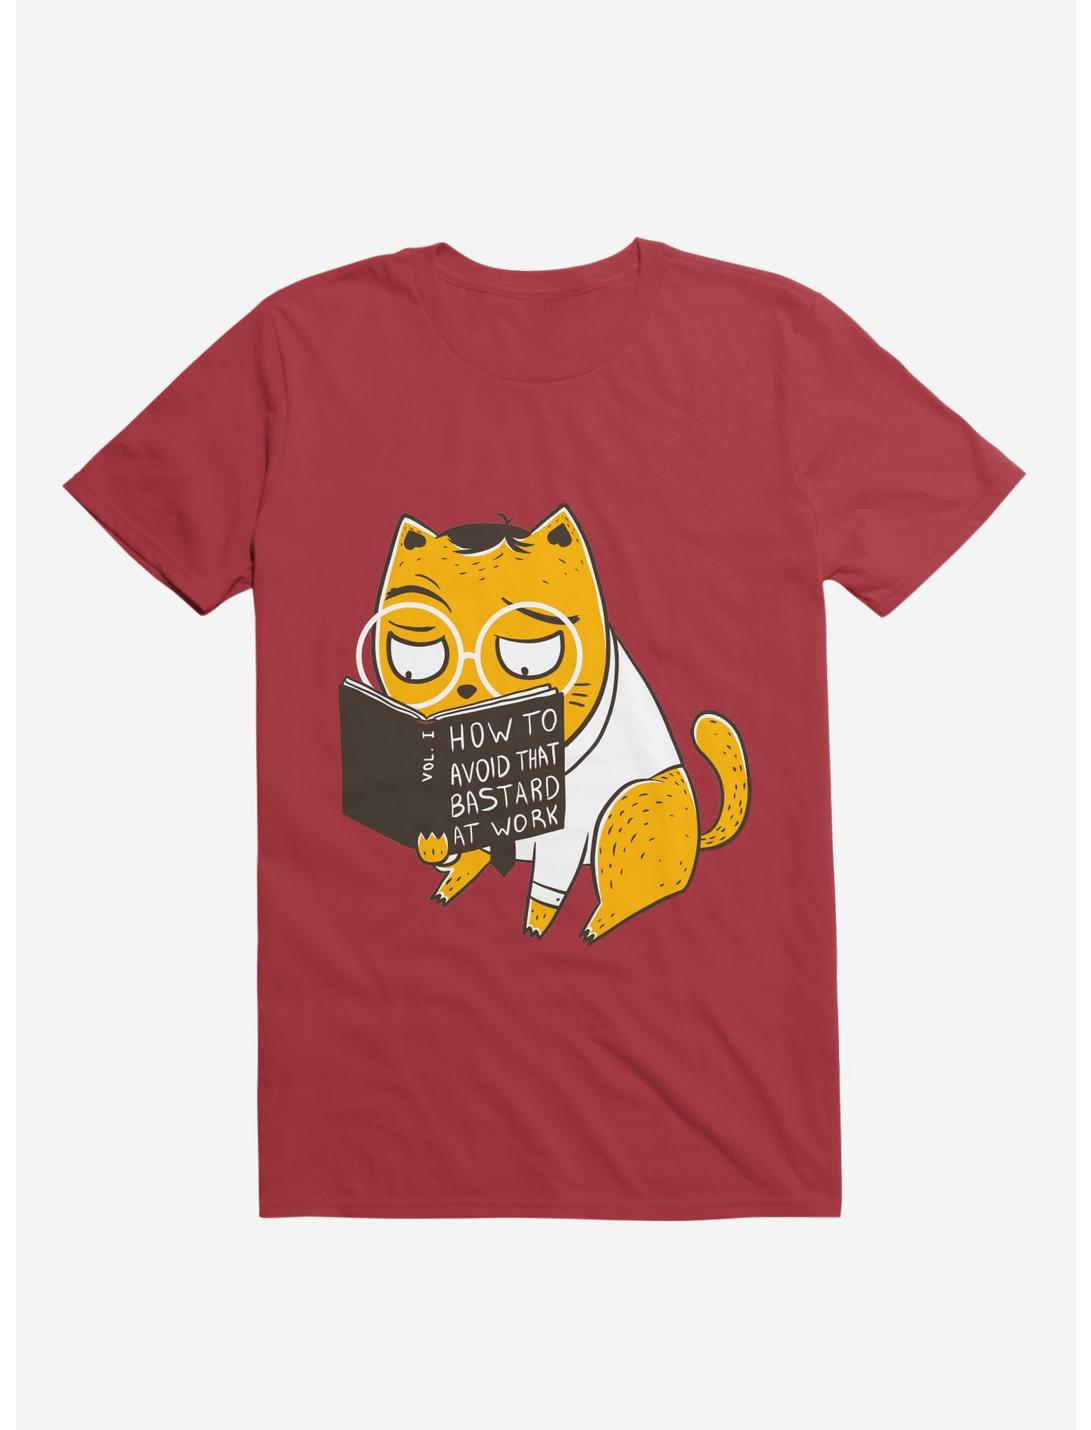 Avoid That Bastard at Work Cat Red T-Shirt, RED, hi-res